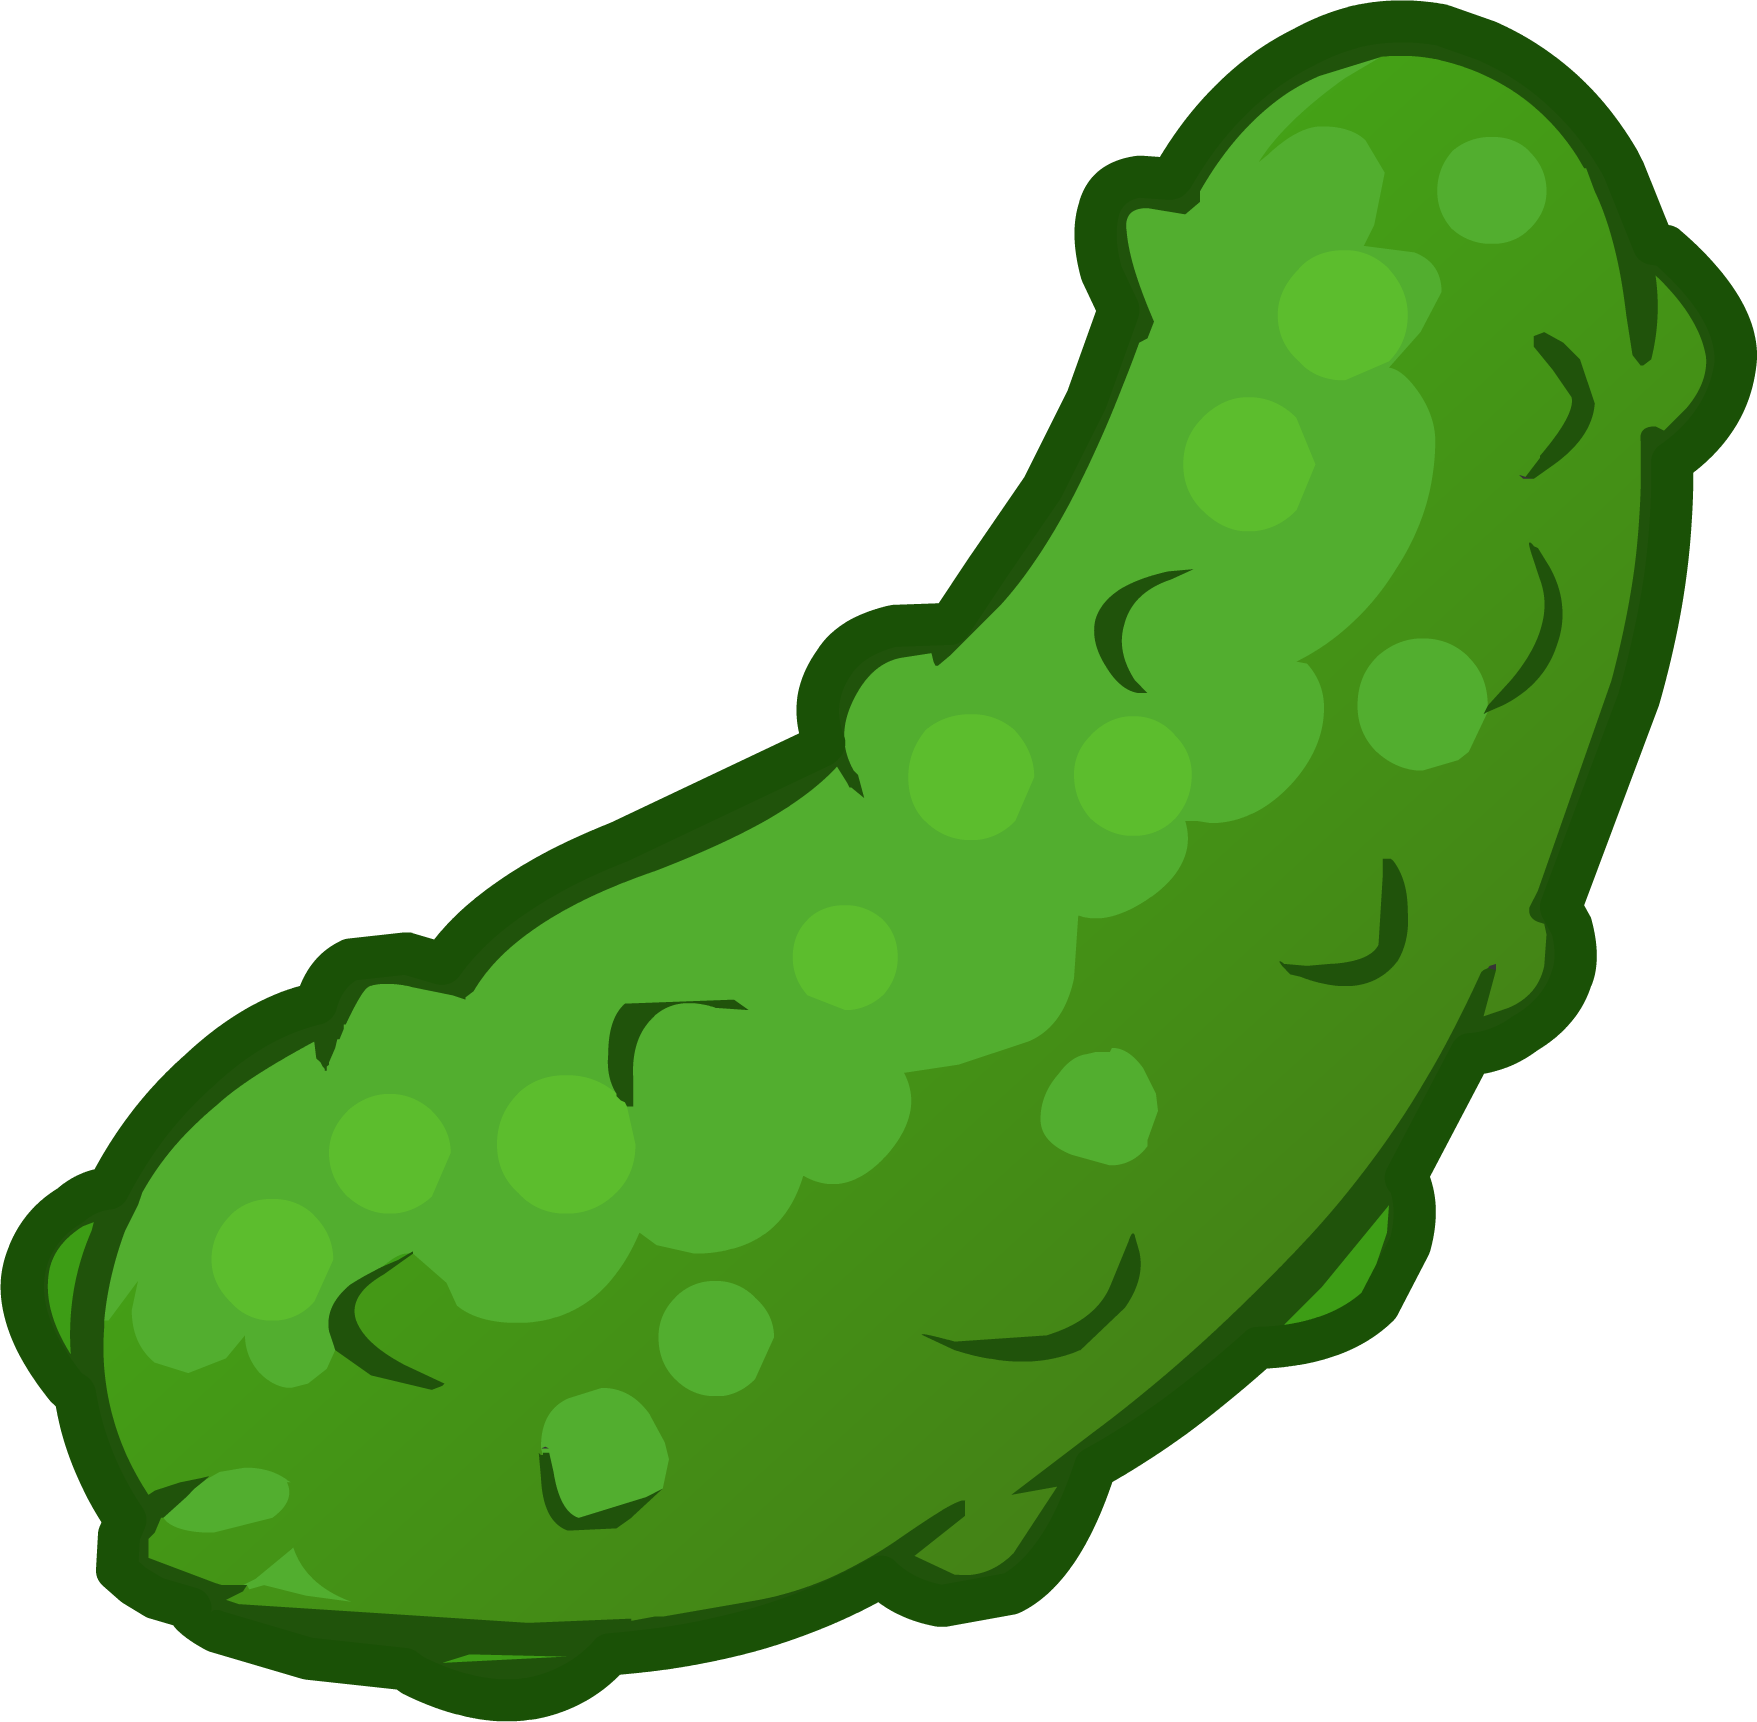 Free pickles cliparts download. Club clipart cute